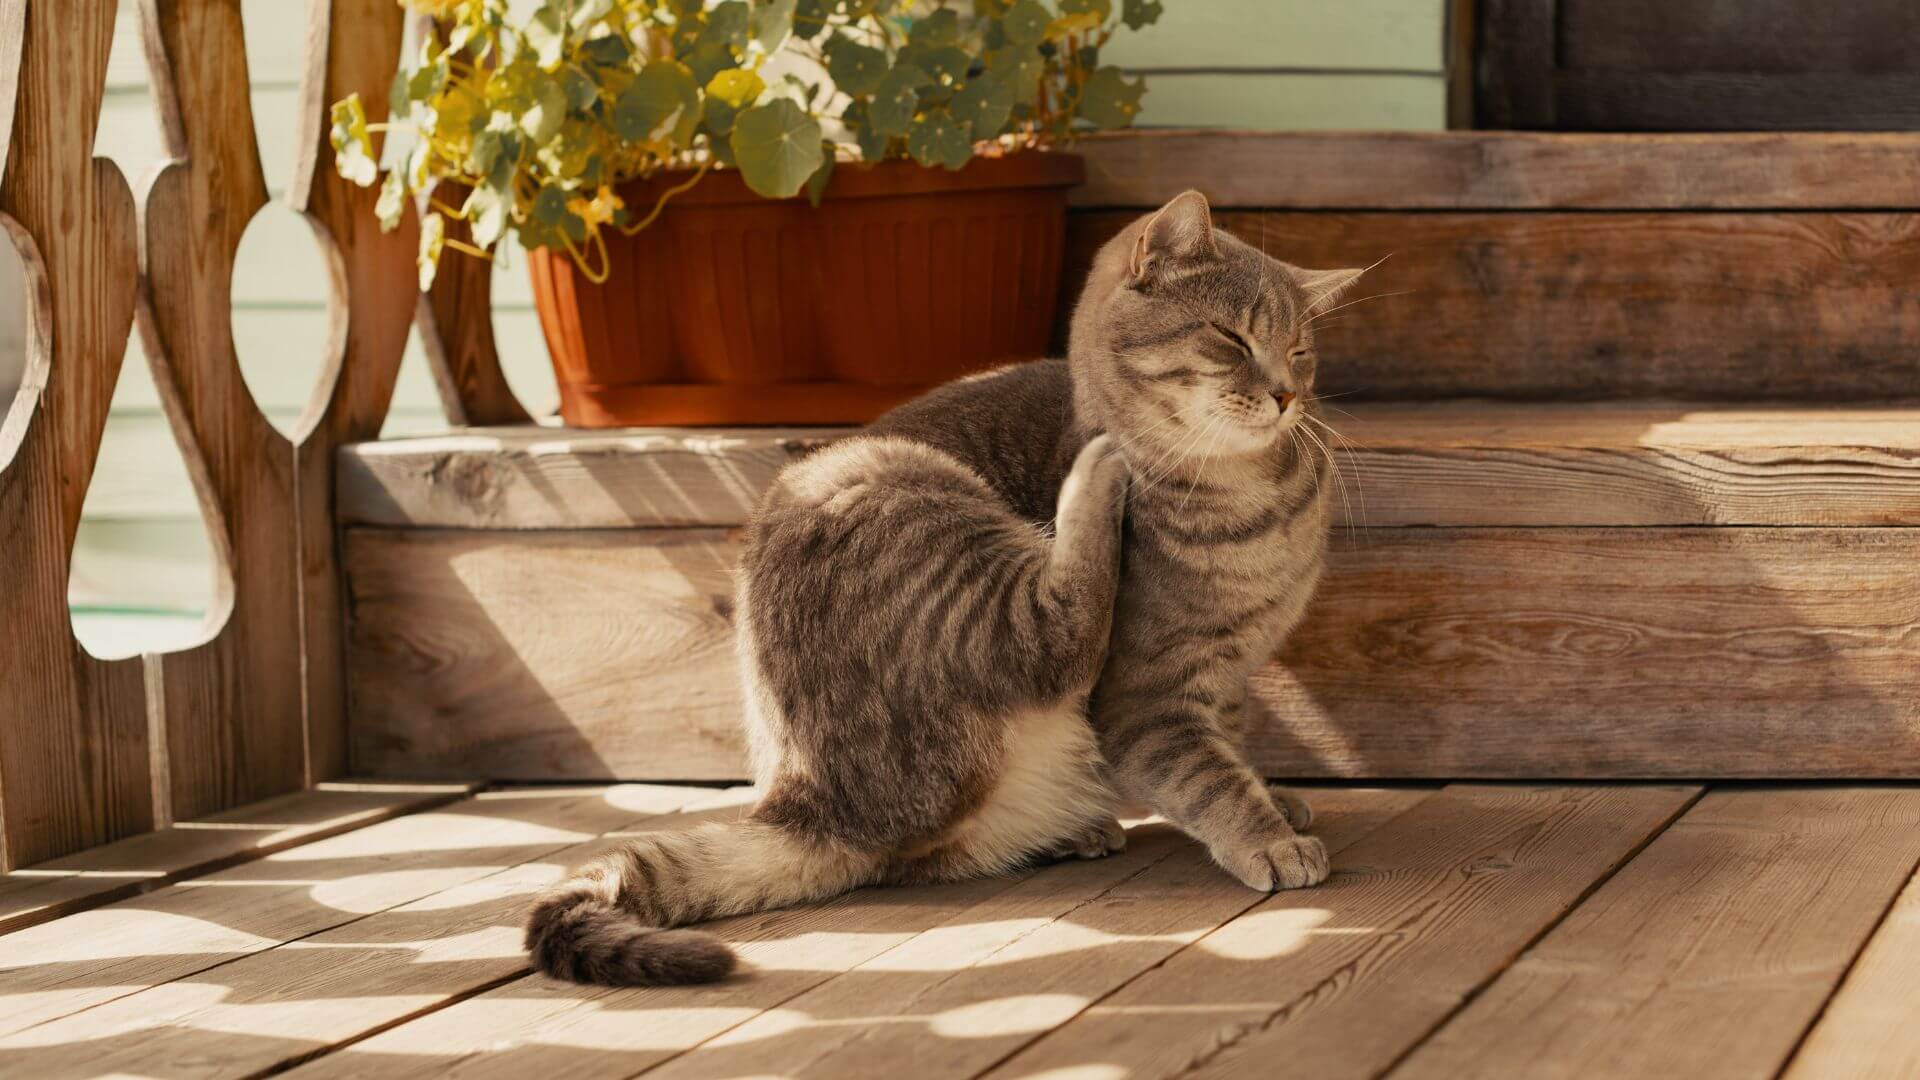 A cat is sitting and scratching on the wooden floor